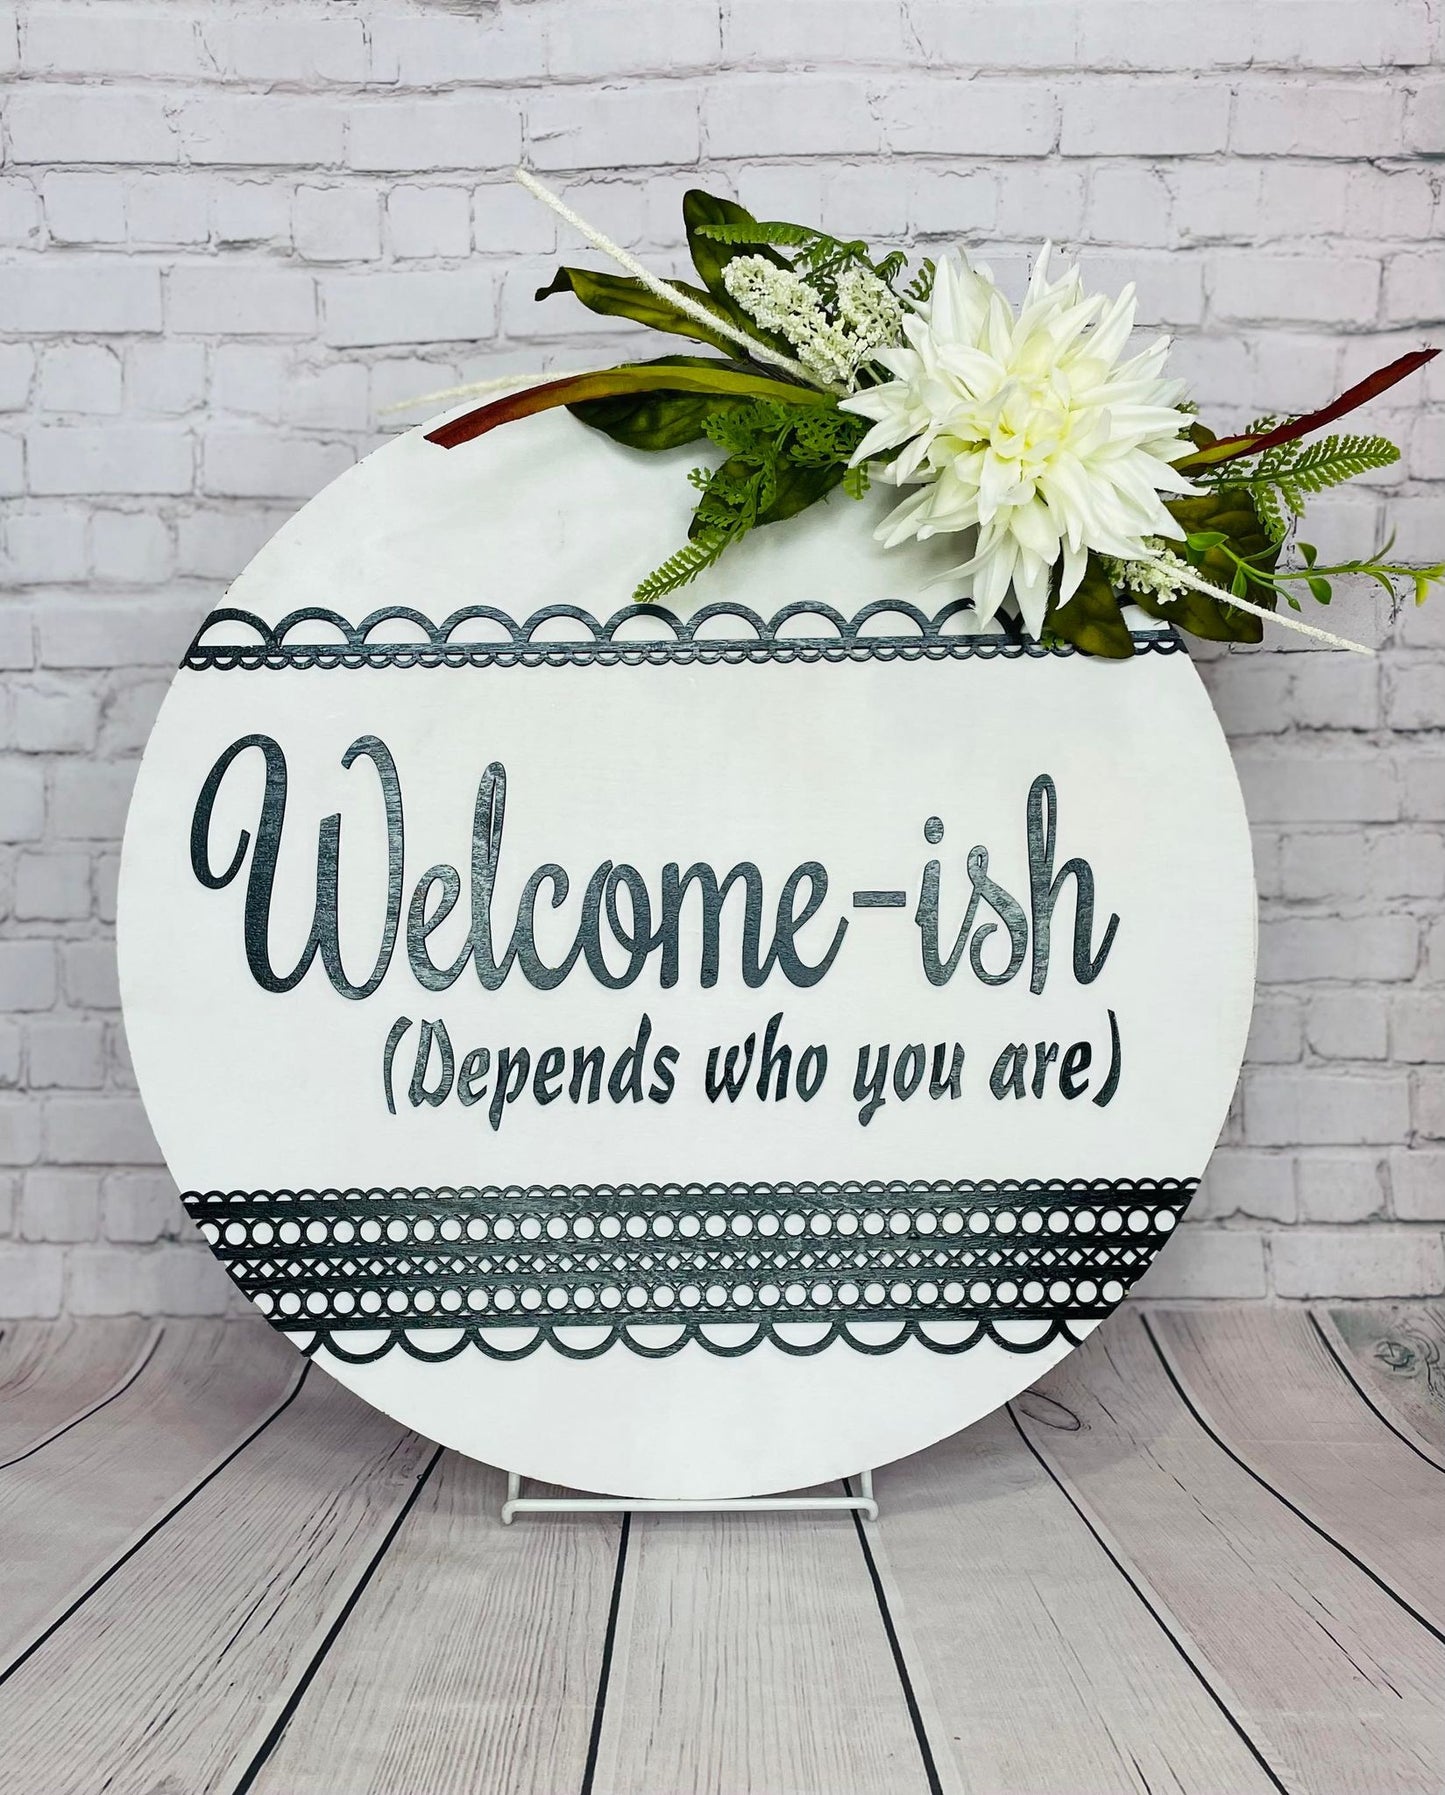 Welcome-ish (Depends who you are) Sign